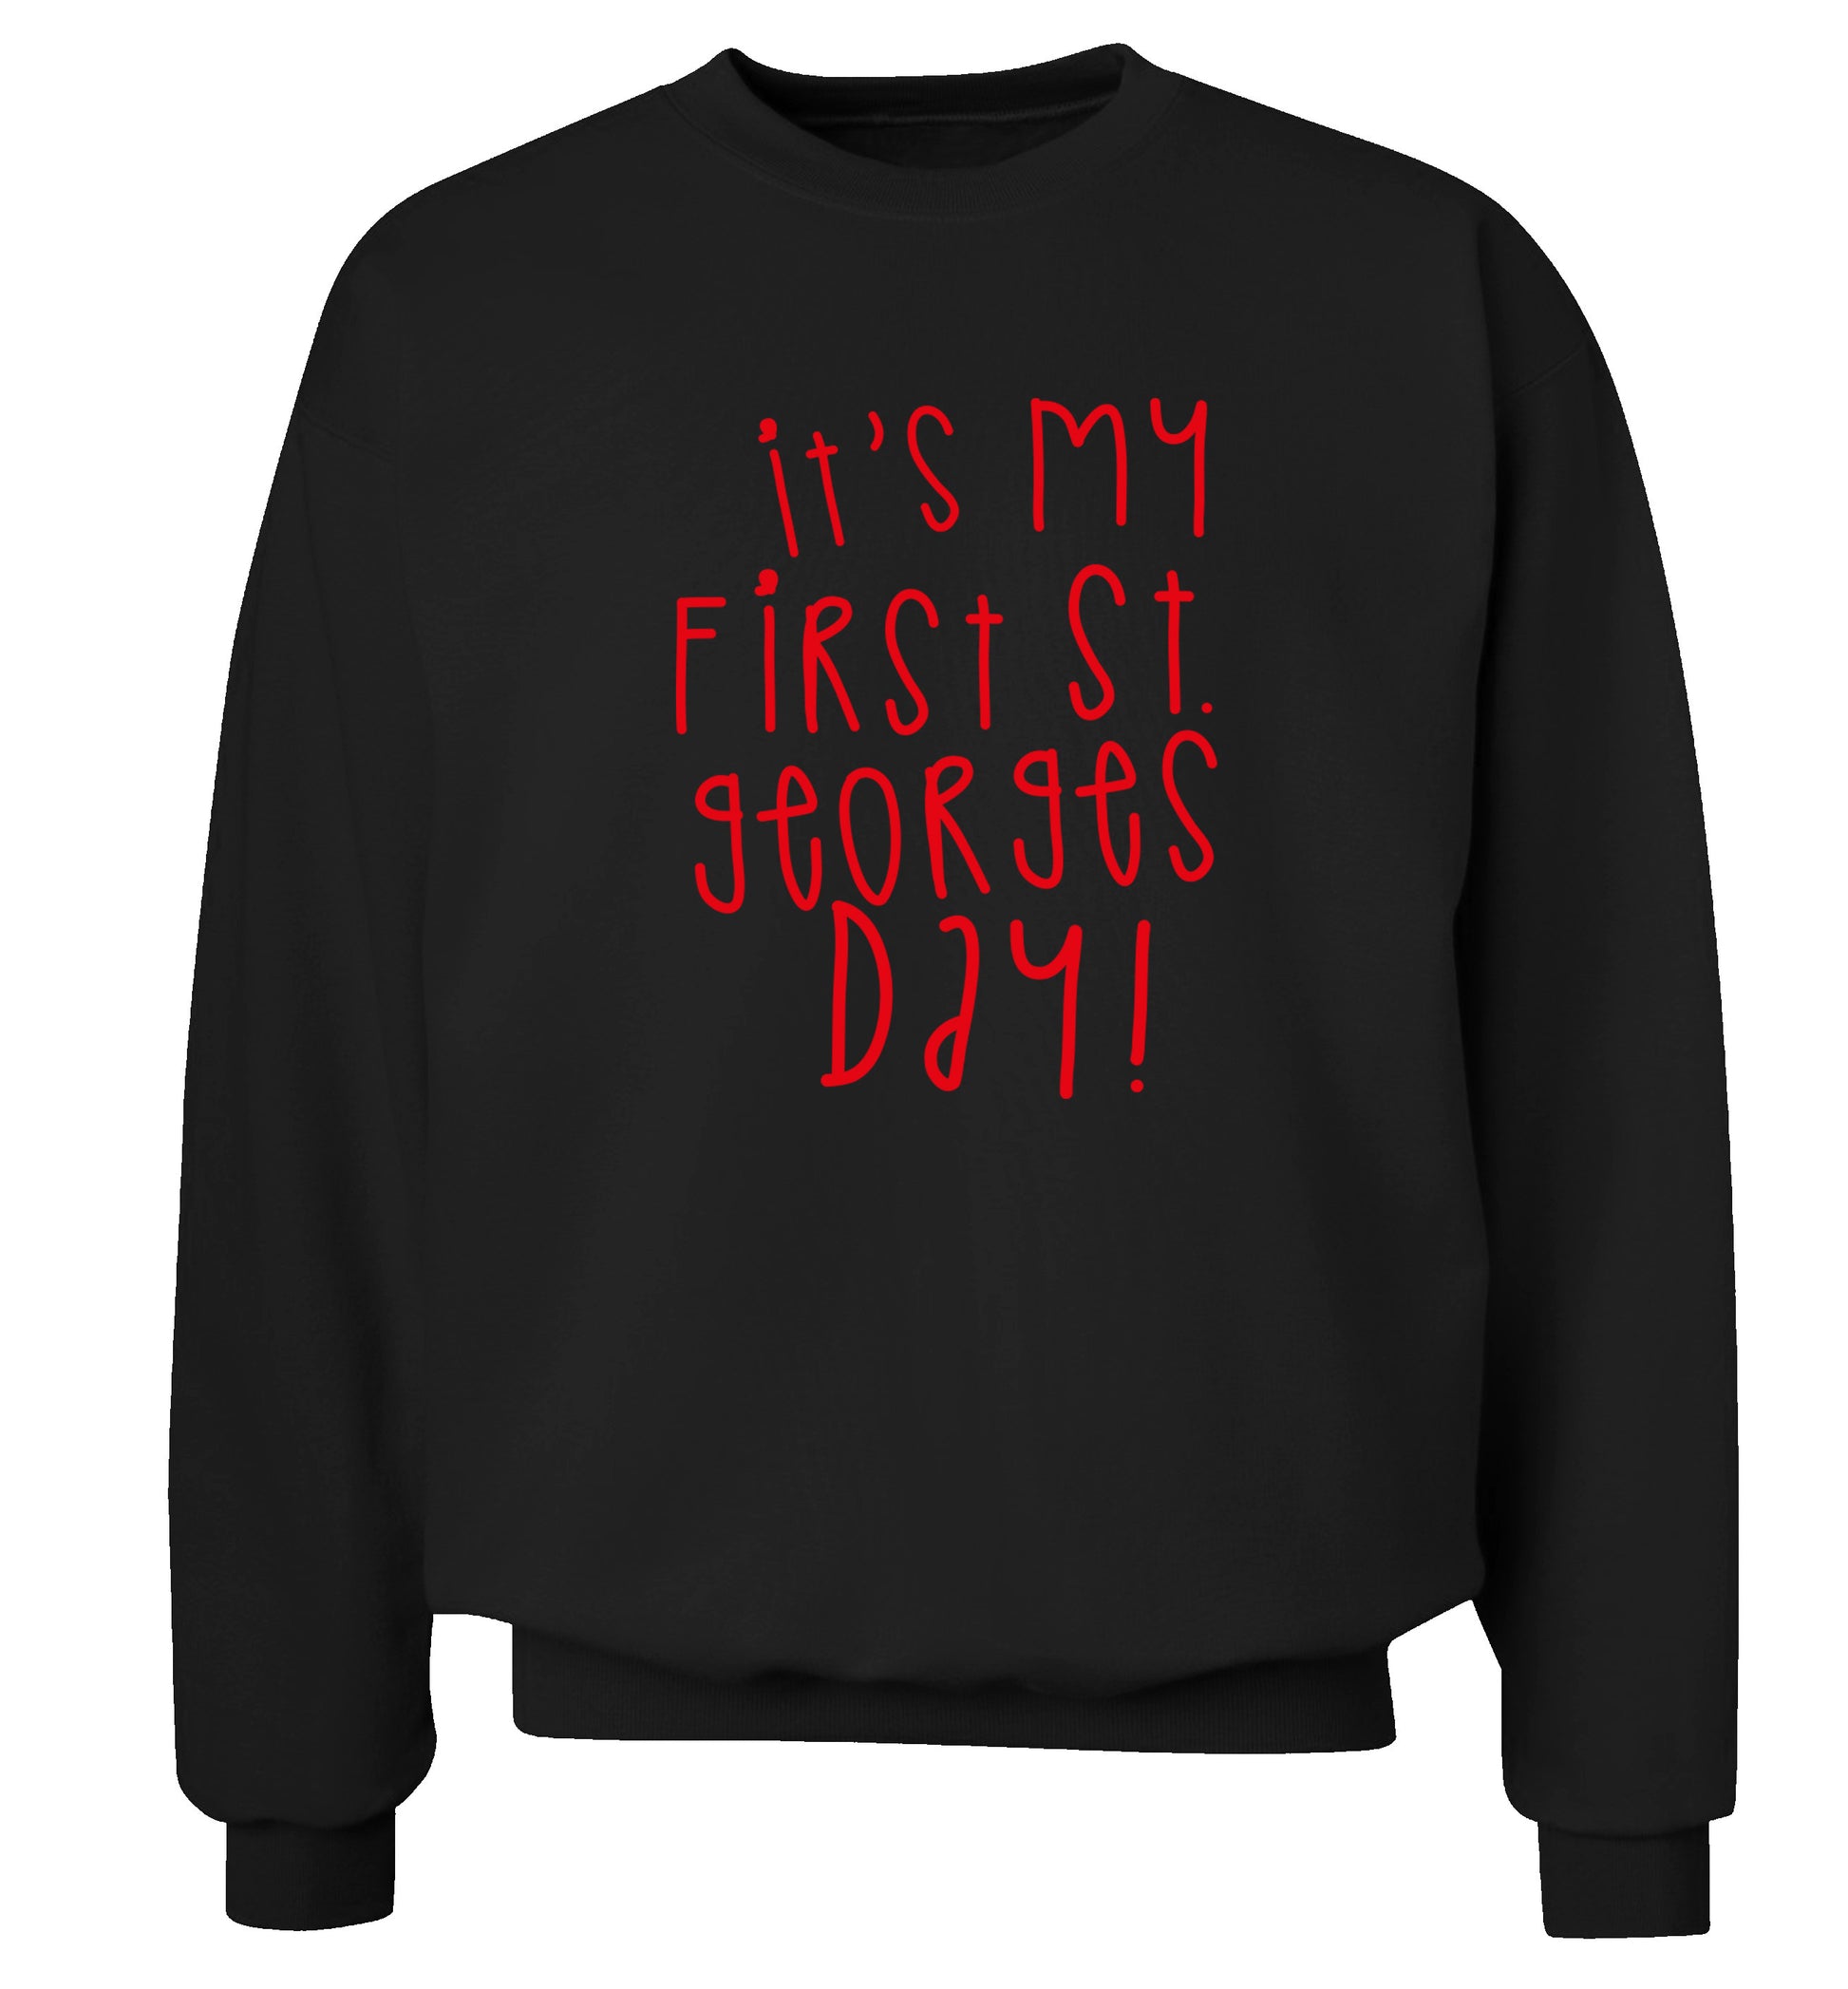 It's my first St Georges day Adult's unisex black Sweater 2XL